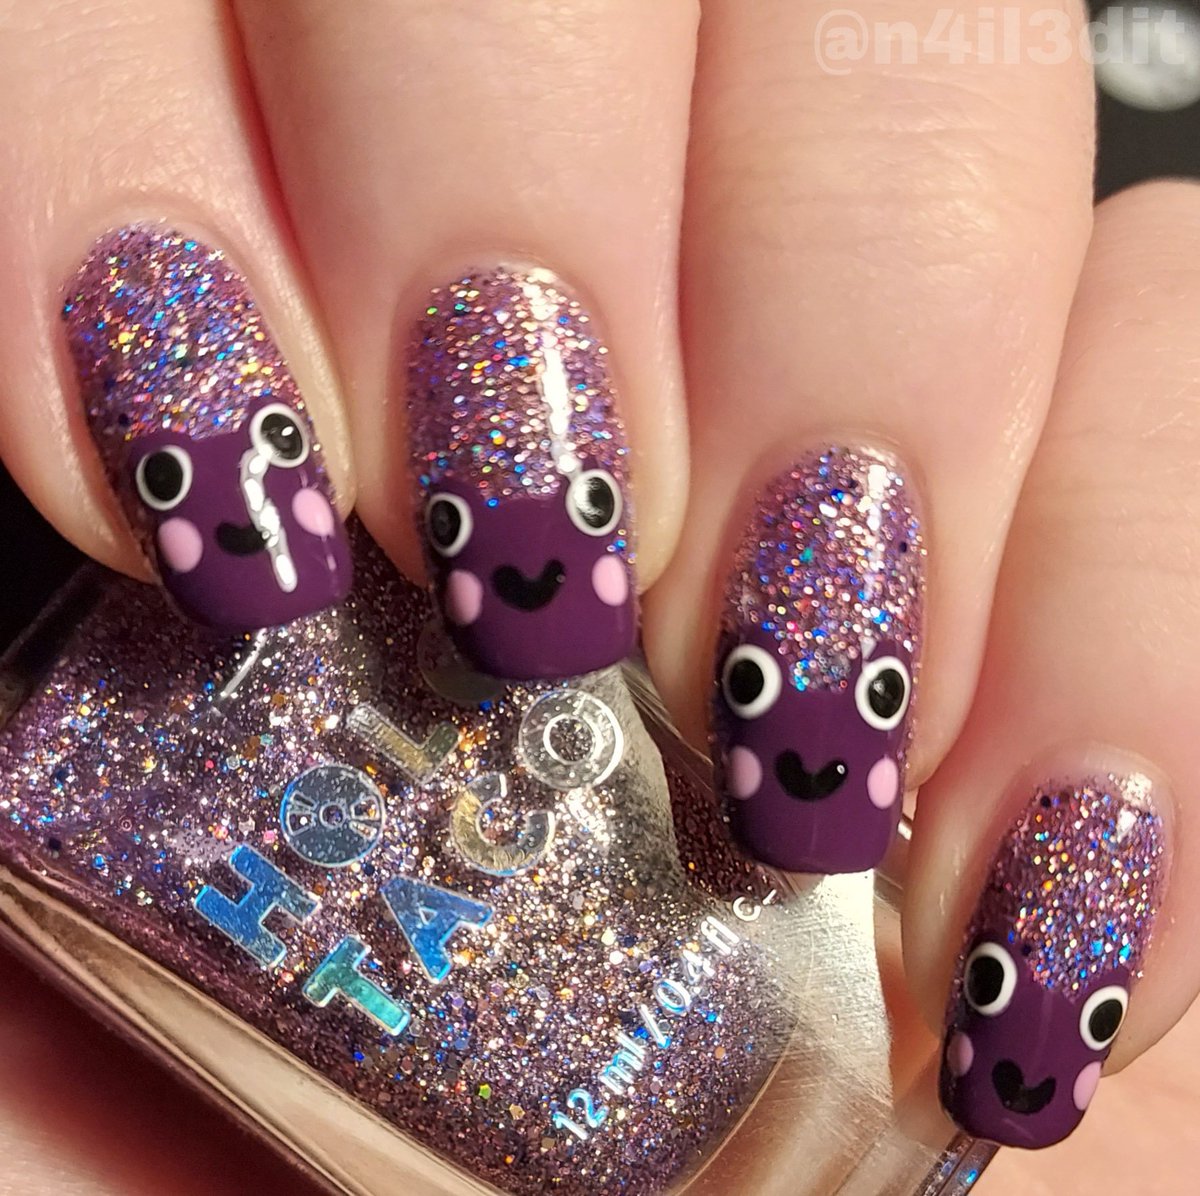 Holo #amethystkittens here is a purple frog mani for #itsthevietgirlsbirthday 🐸💜

💜💜
Products from 
@holotaco @nailogical 
💜💜

#holotaco #holotacocombo #purplefrog #purplenails #frognails #frognailart #cutefrog #holonails #nailsoftheday #nails #nailsofinstagram #nailsof2023